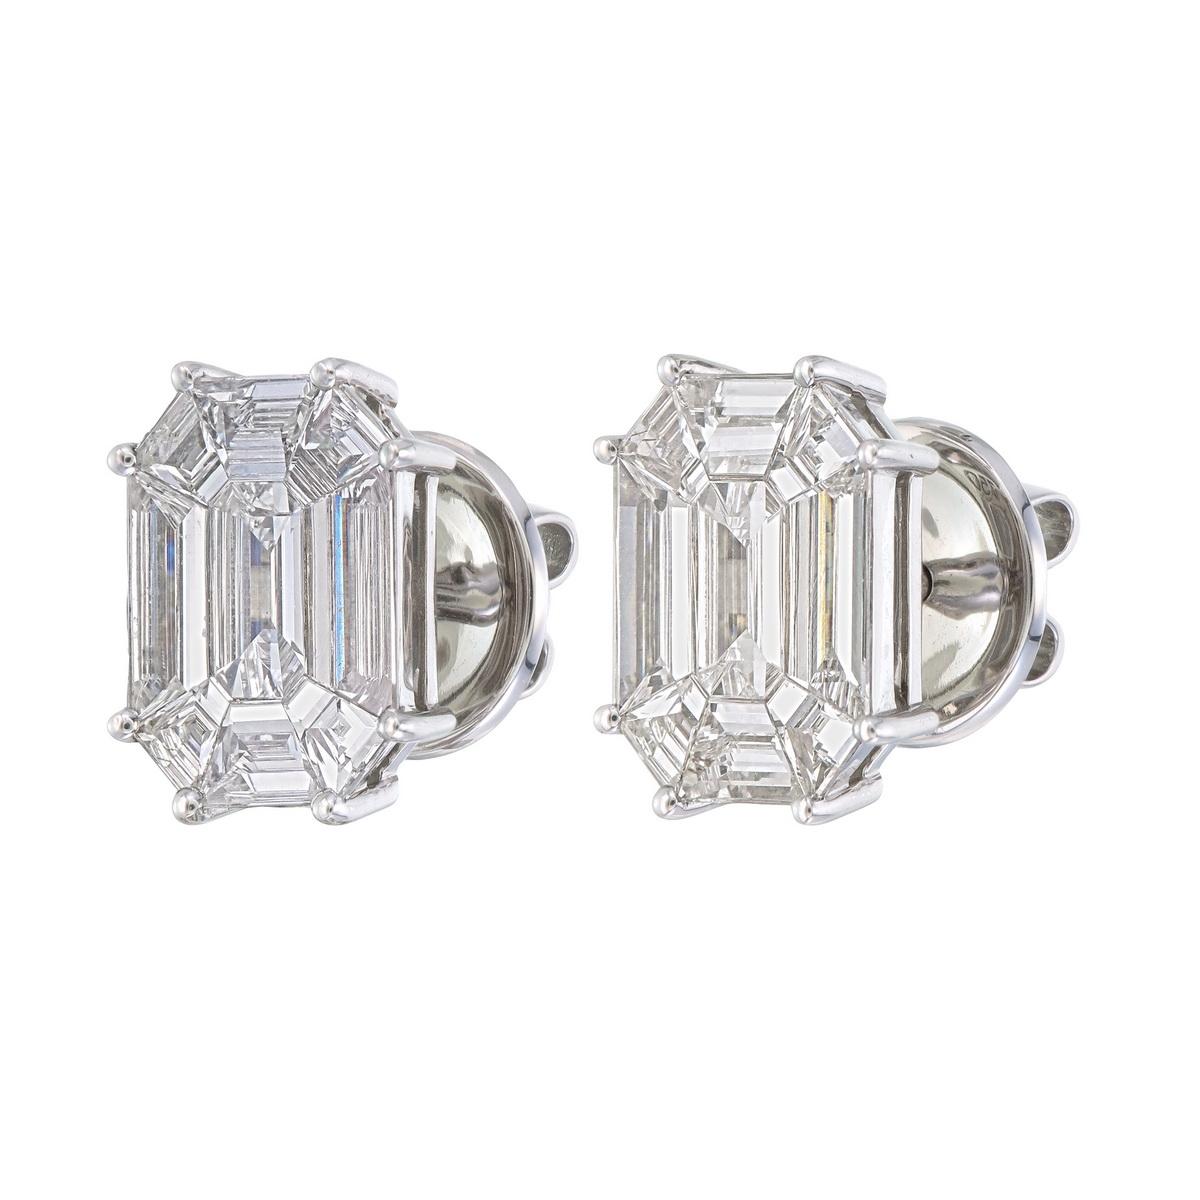 Customized baguatte, Emerald cut & trapezoid cut diamond cut & placed perfectly to give a single diamond look.
Extremely light on ears

A 15+ carat Emerald cut diamond pair costs 20 times the price of these earrings & this gives you a great look